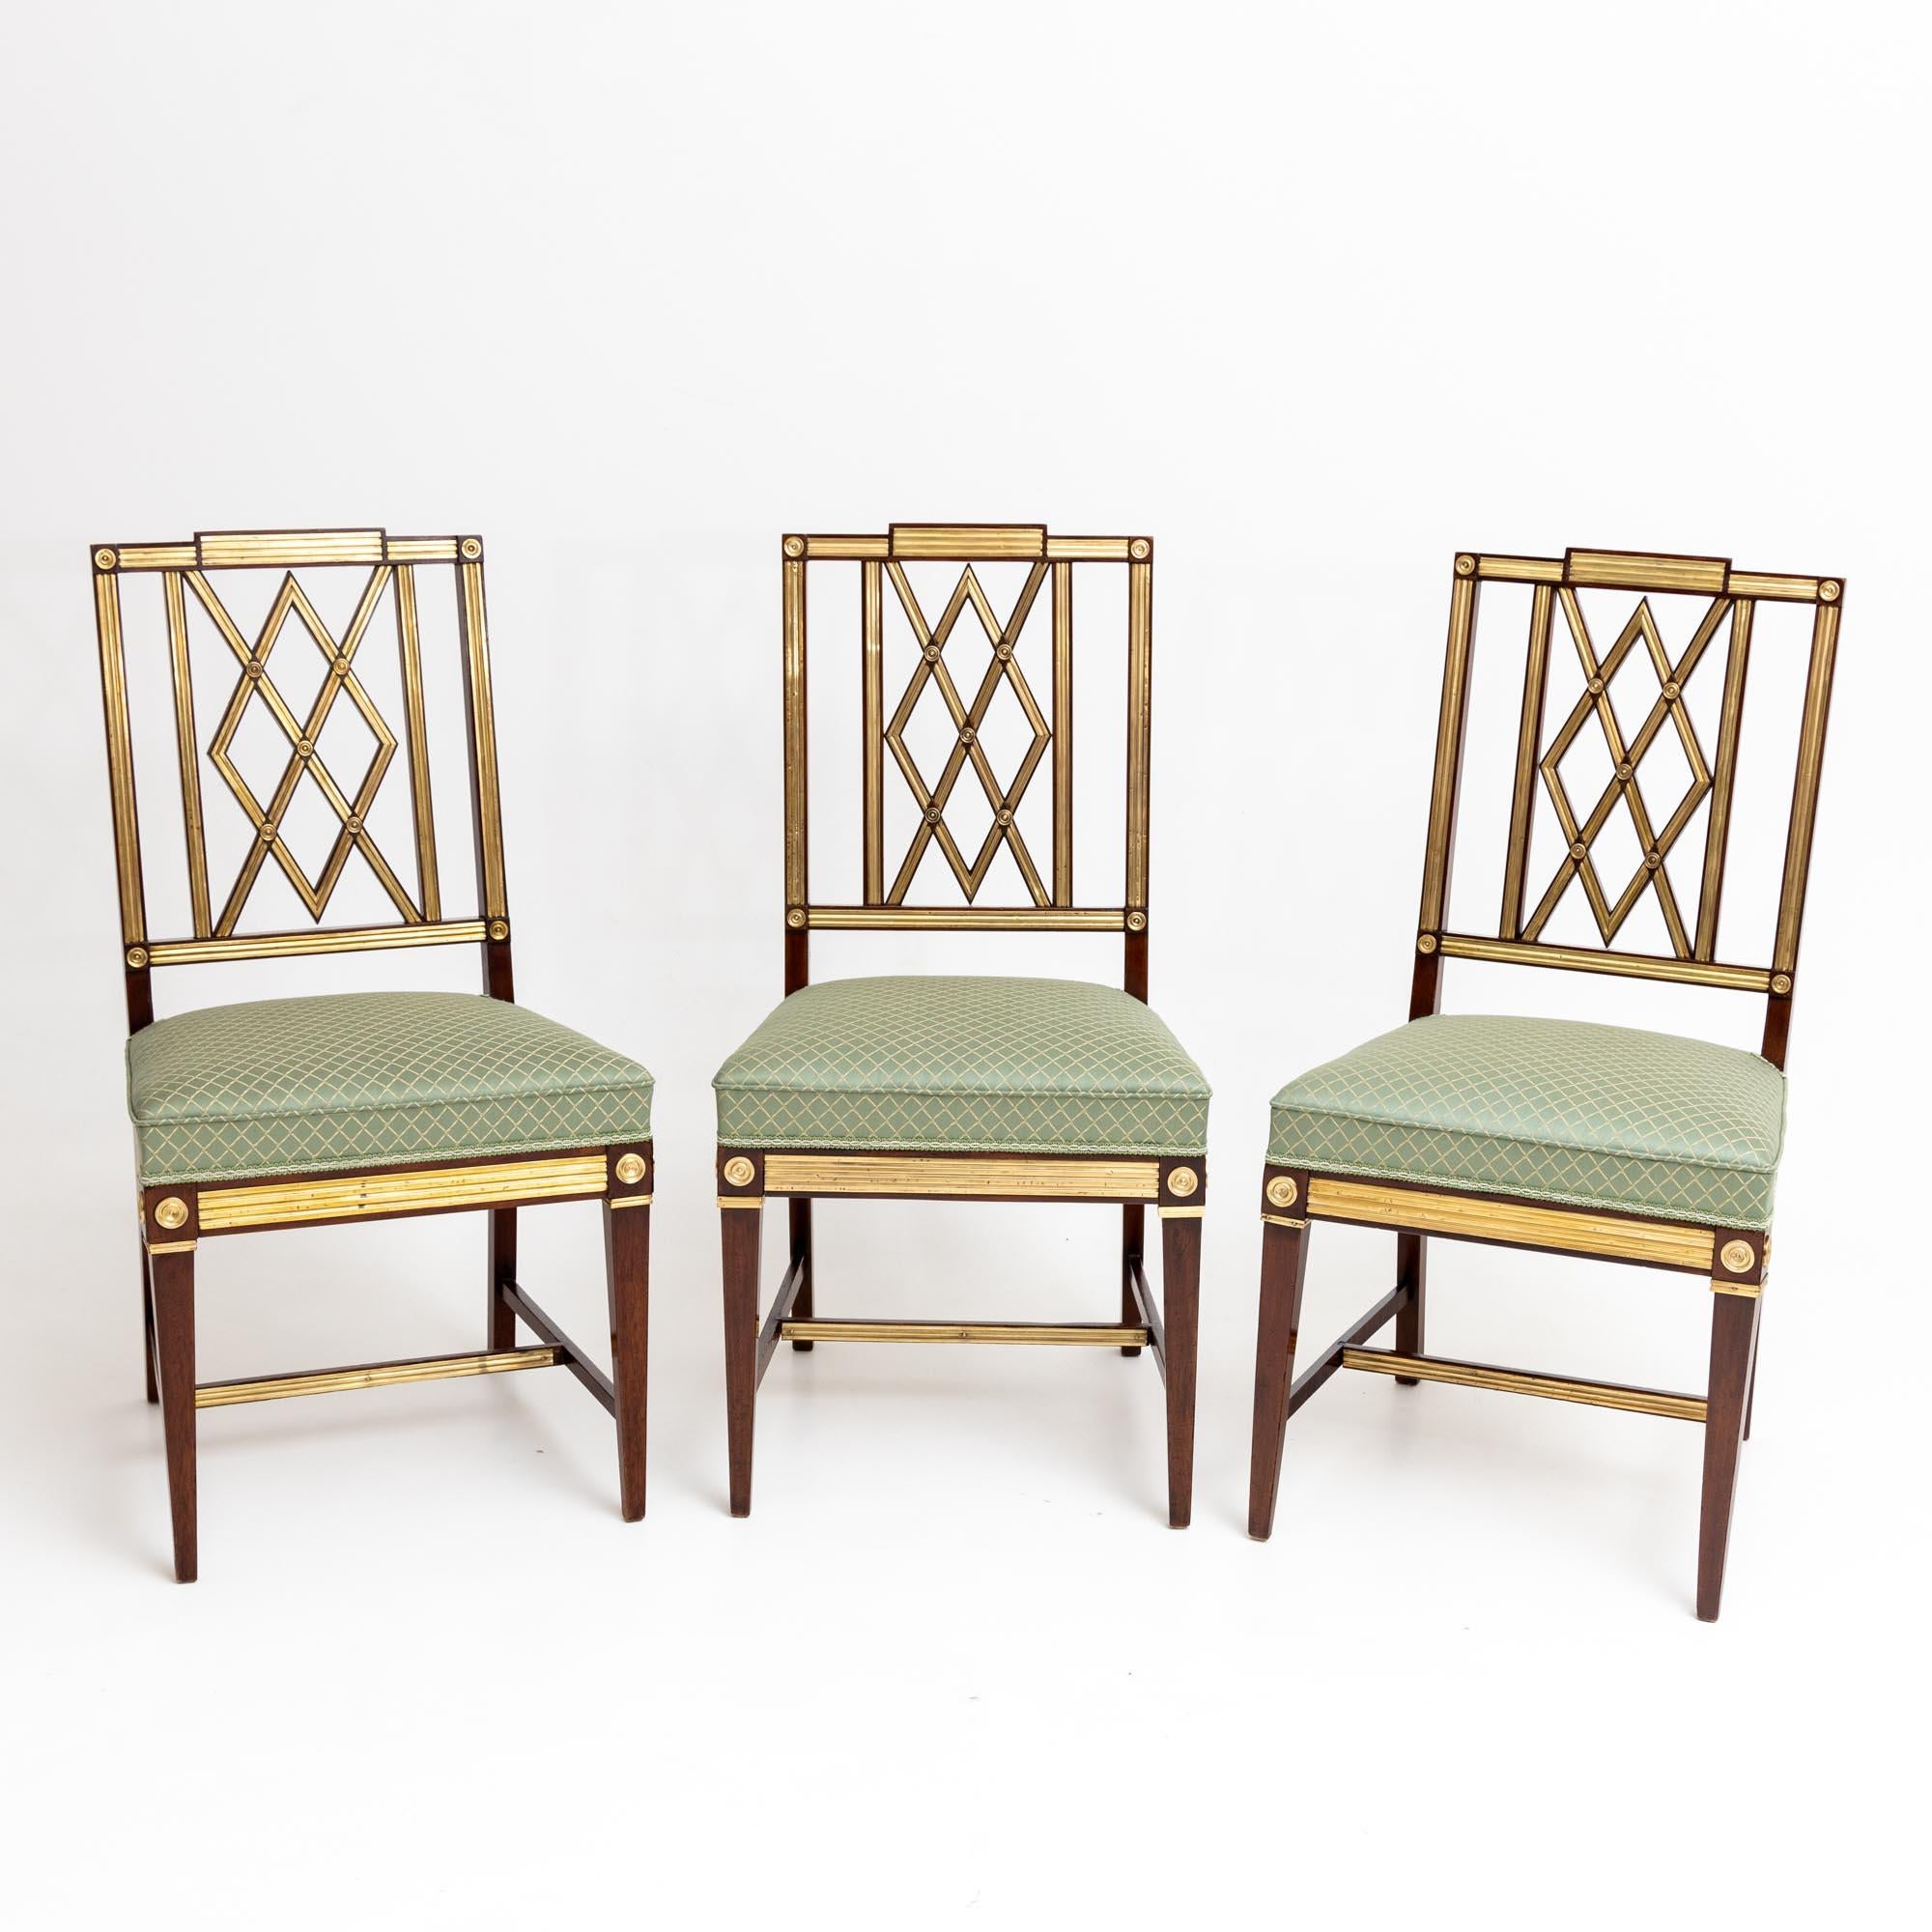 Neoclassical Dining Room Chairs, Baltic, End of 18th Century For Sale 3